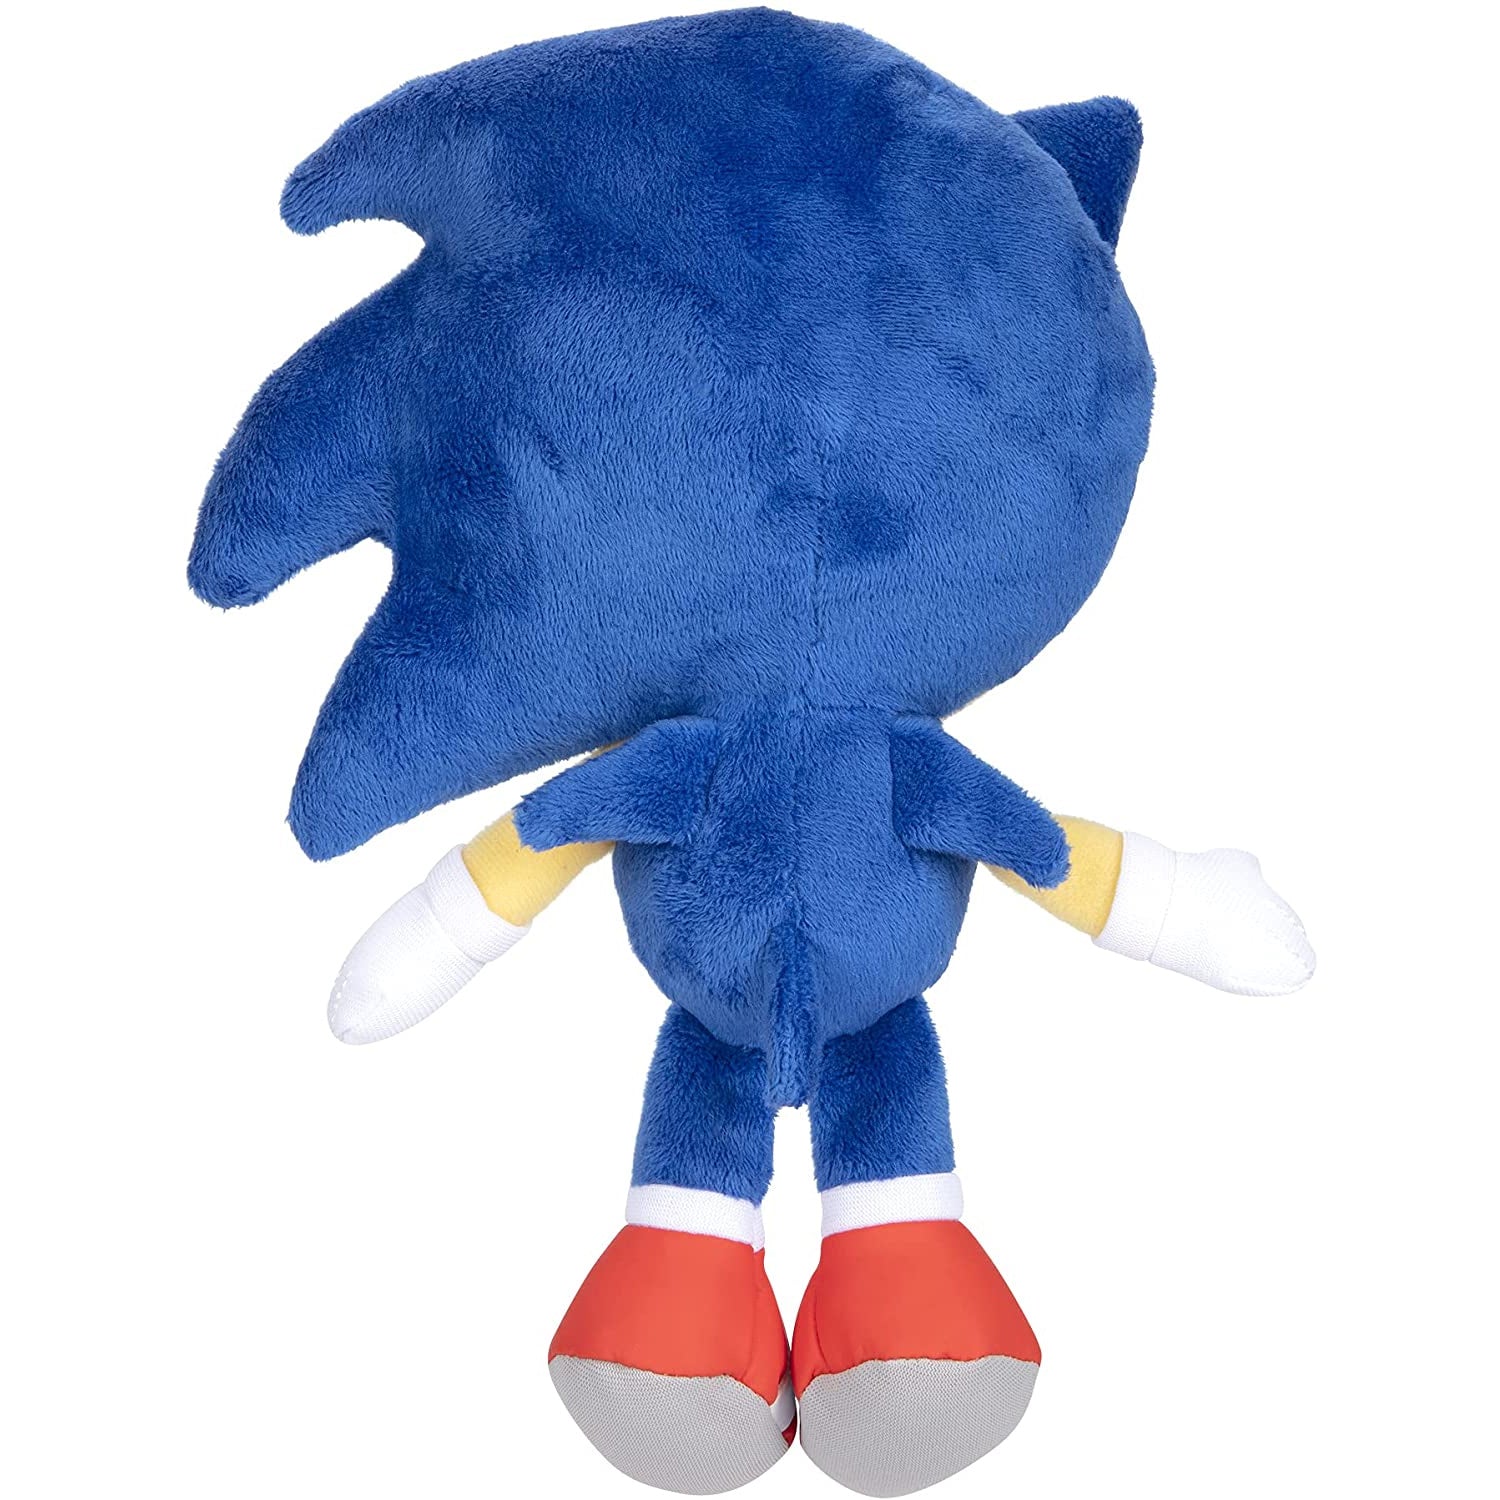 Sonic The Hedgehog Plush 8-Inch Collectible Toy